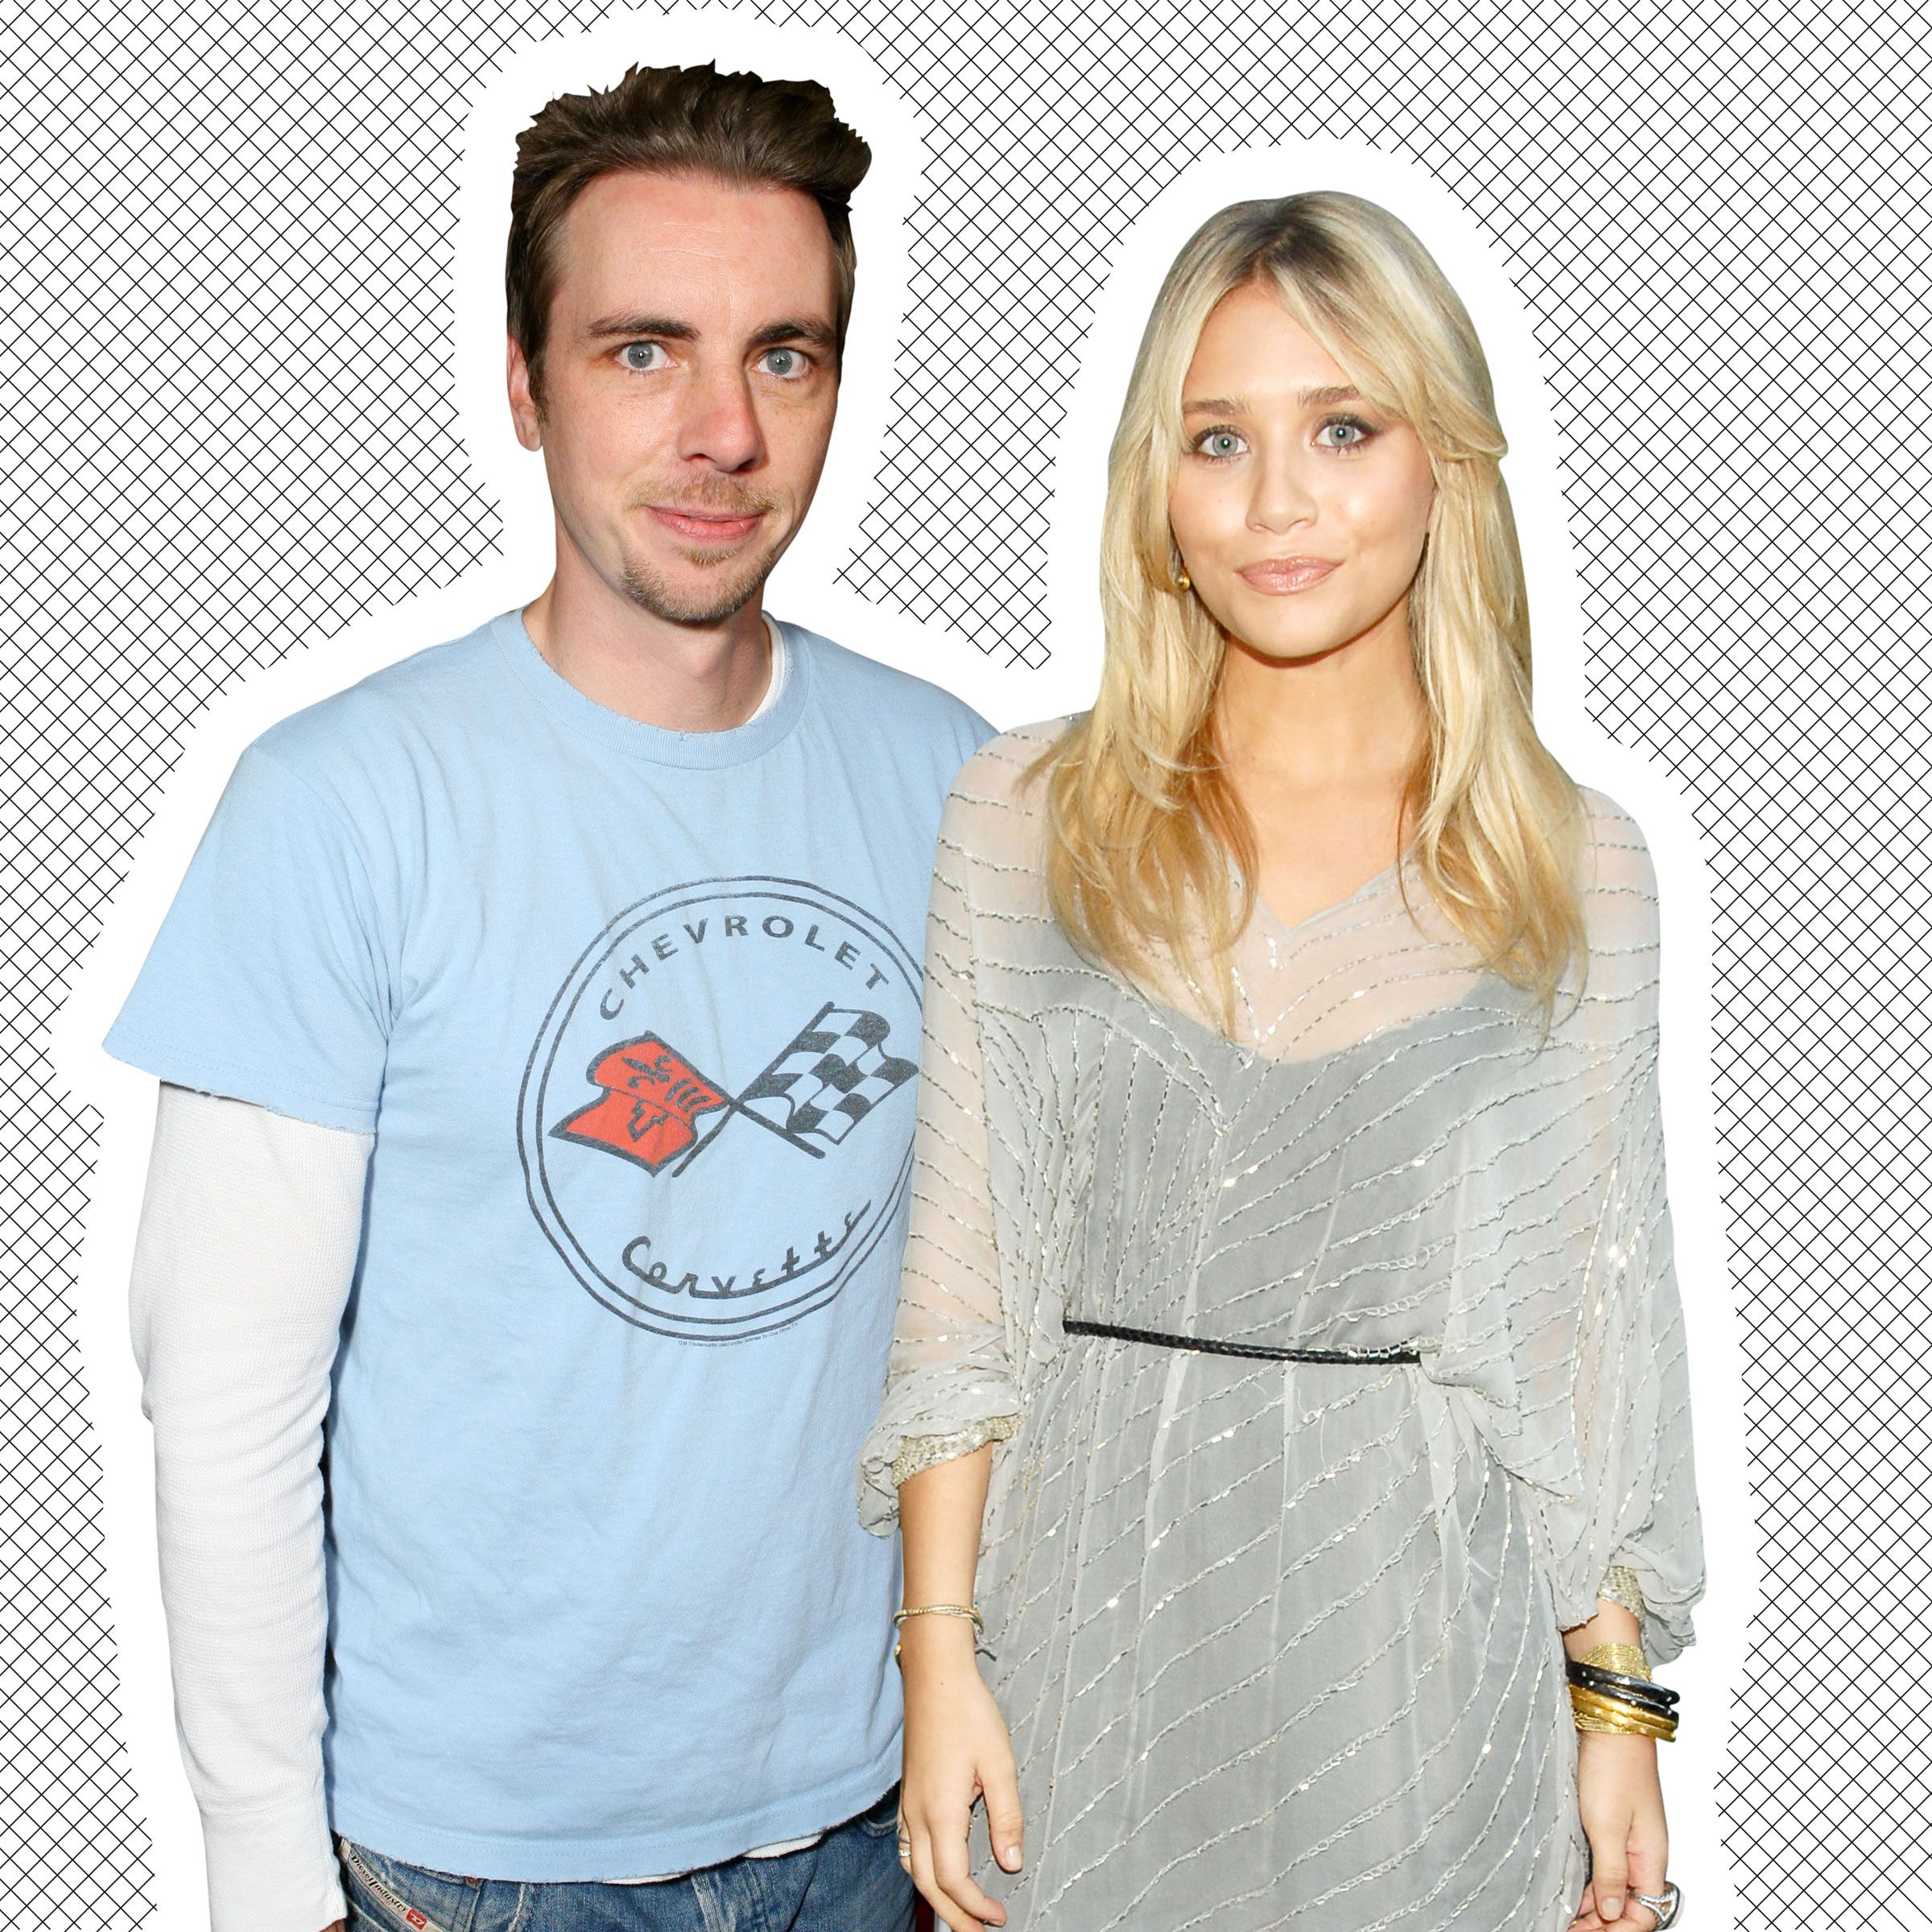 Apparently, Dax Shepard and Ashley Olsen Dated Once